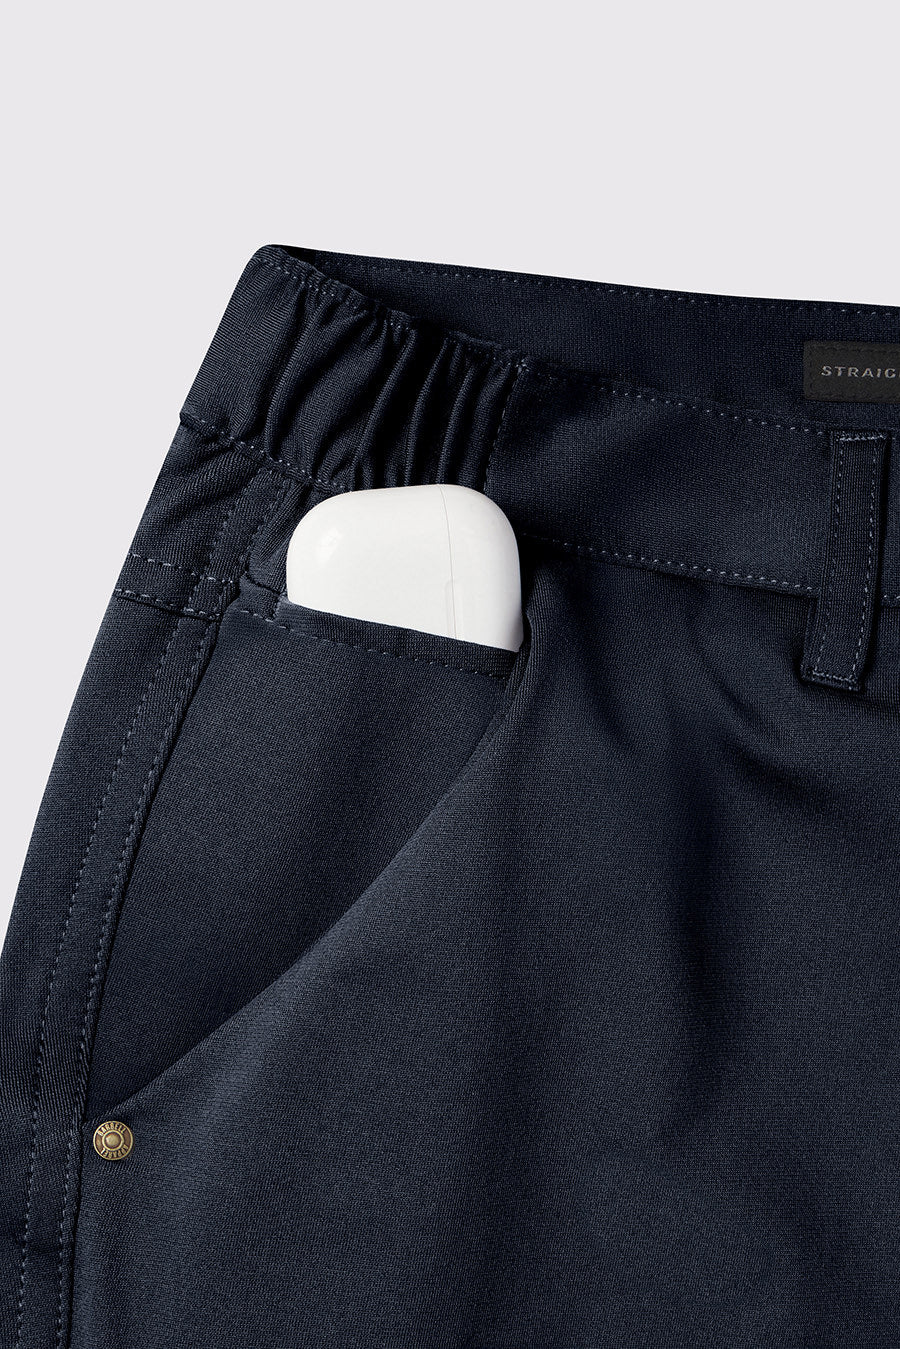 Anything Dress Pant - Navy - photo from pocket #color_navy